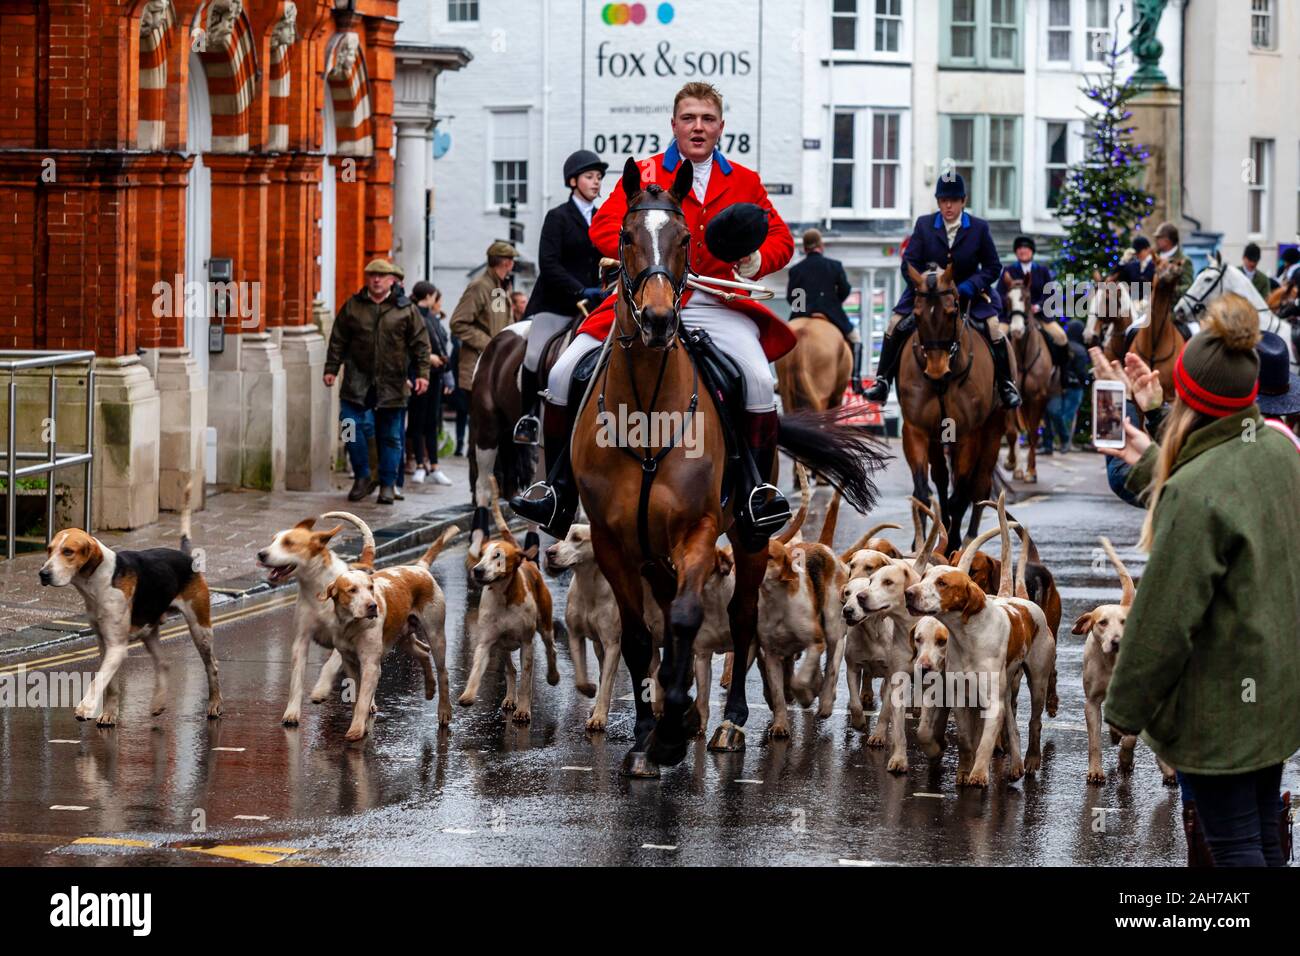 Lewes, UK. 26th December 2019.  Members of The Southdown and Eridge Hunt arrive for their annual Boxing Day meeting, Lewes, Sussex, UK.  Credit: Grant Rooney/Alamy Live News Stock Photo